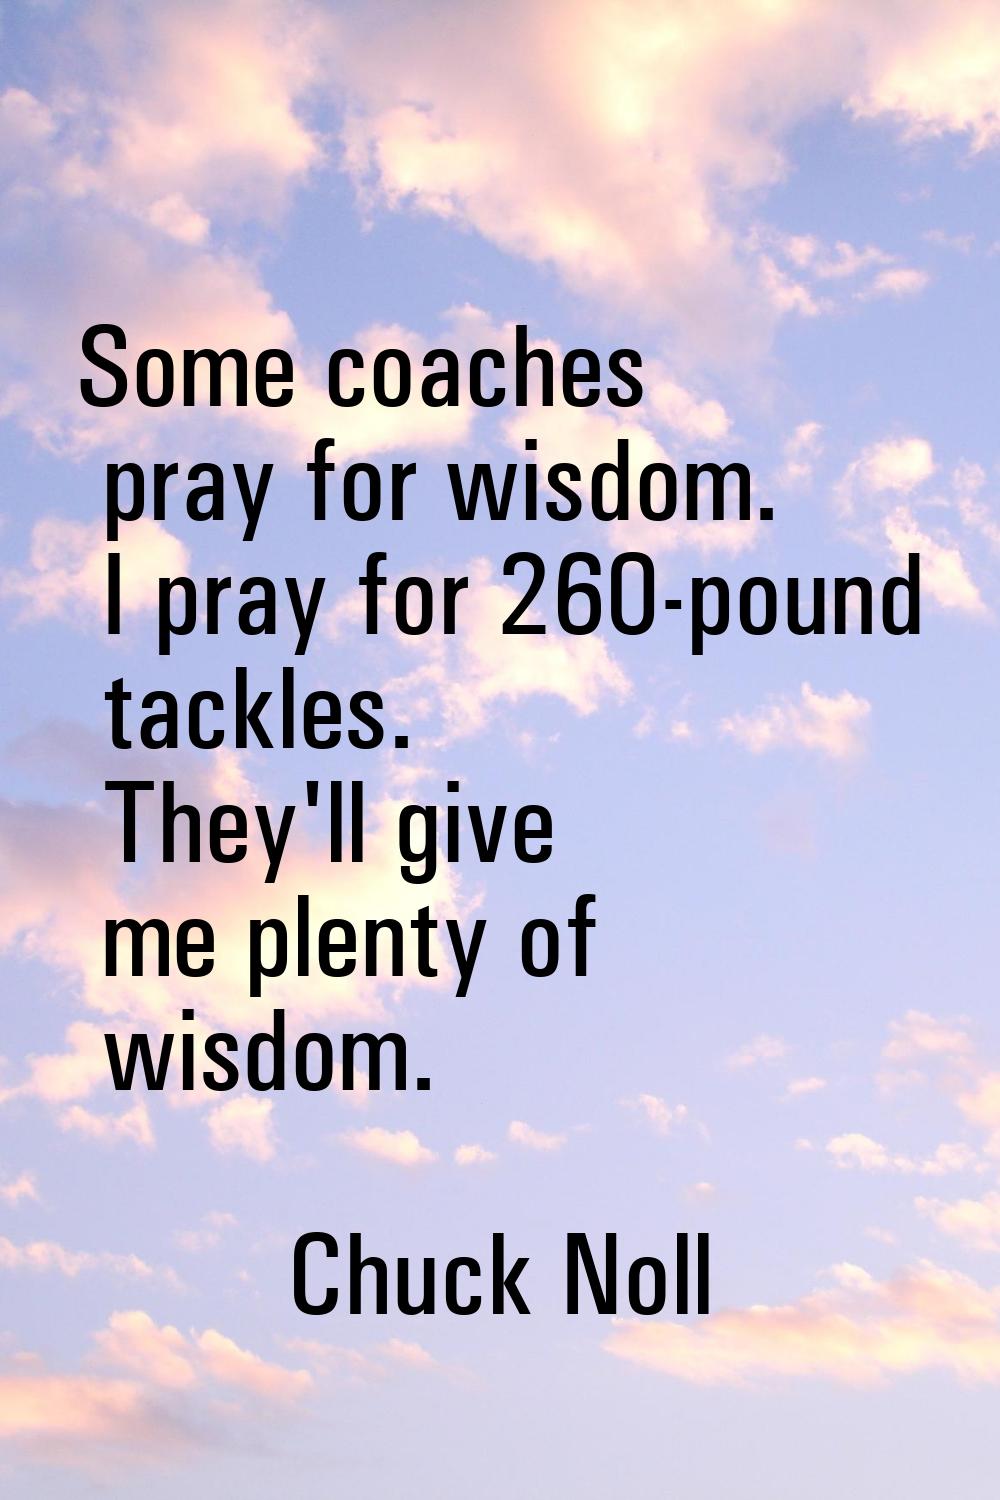 Some coaches pray for wisdom. I pray for 260-pound tackles. They'll give me plenty of wisdom.